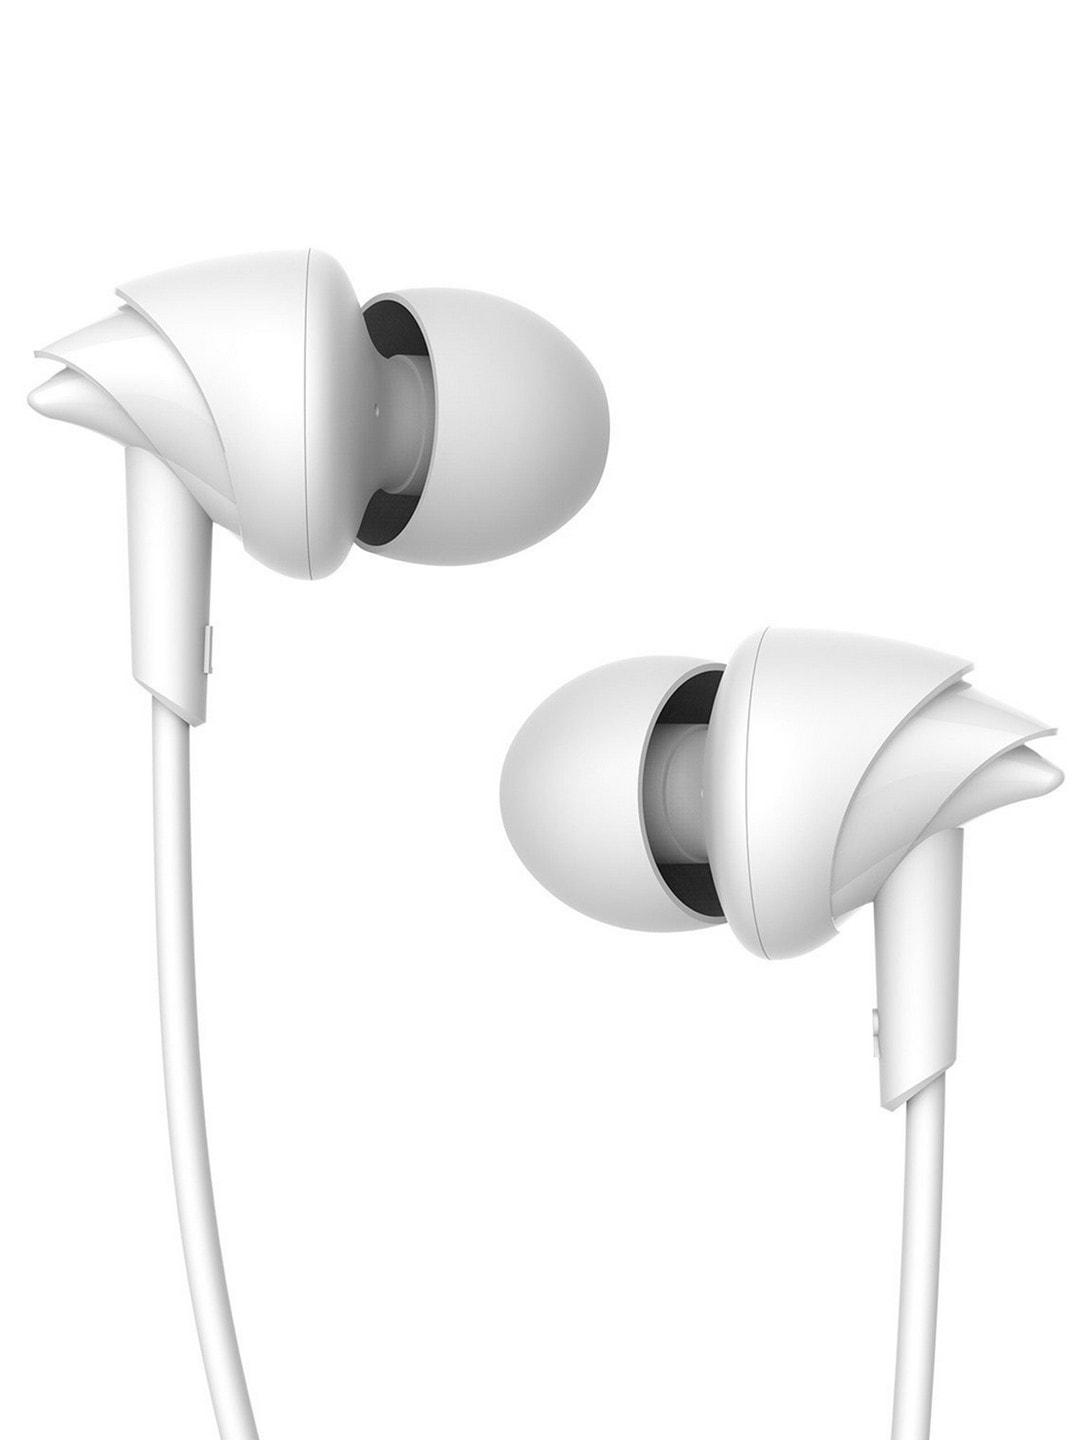 boat bassheads 100 m white wired earphones with enhanced bass hawk-inspired design & mic